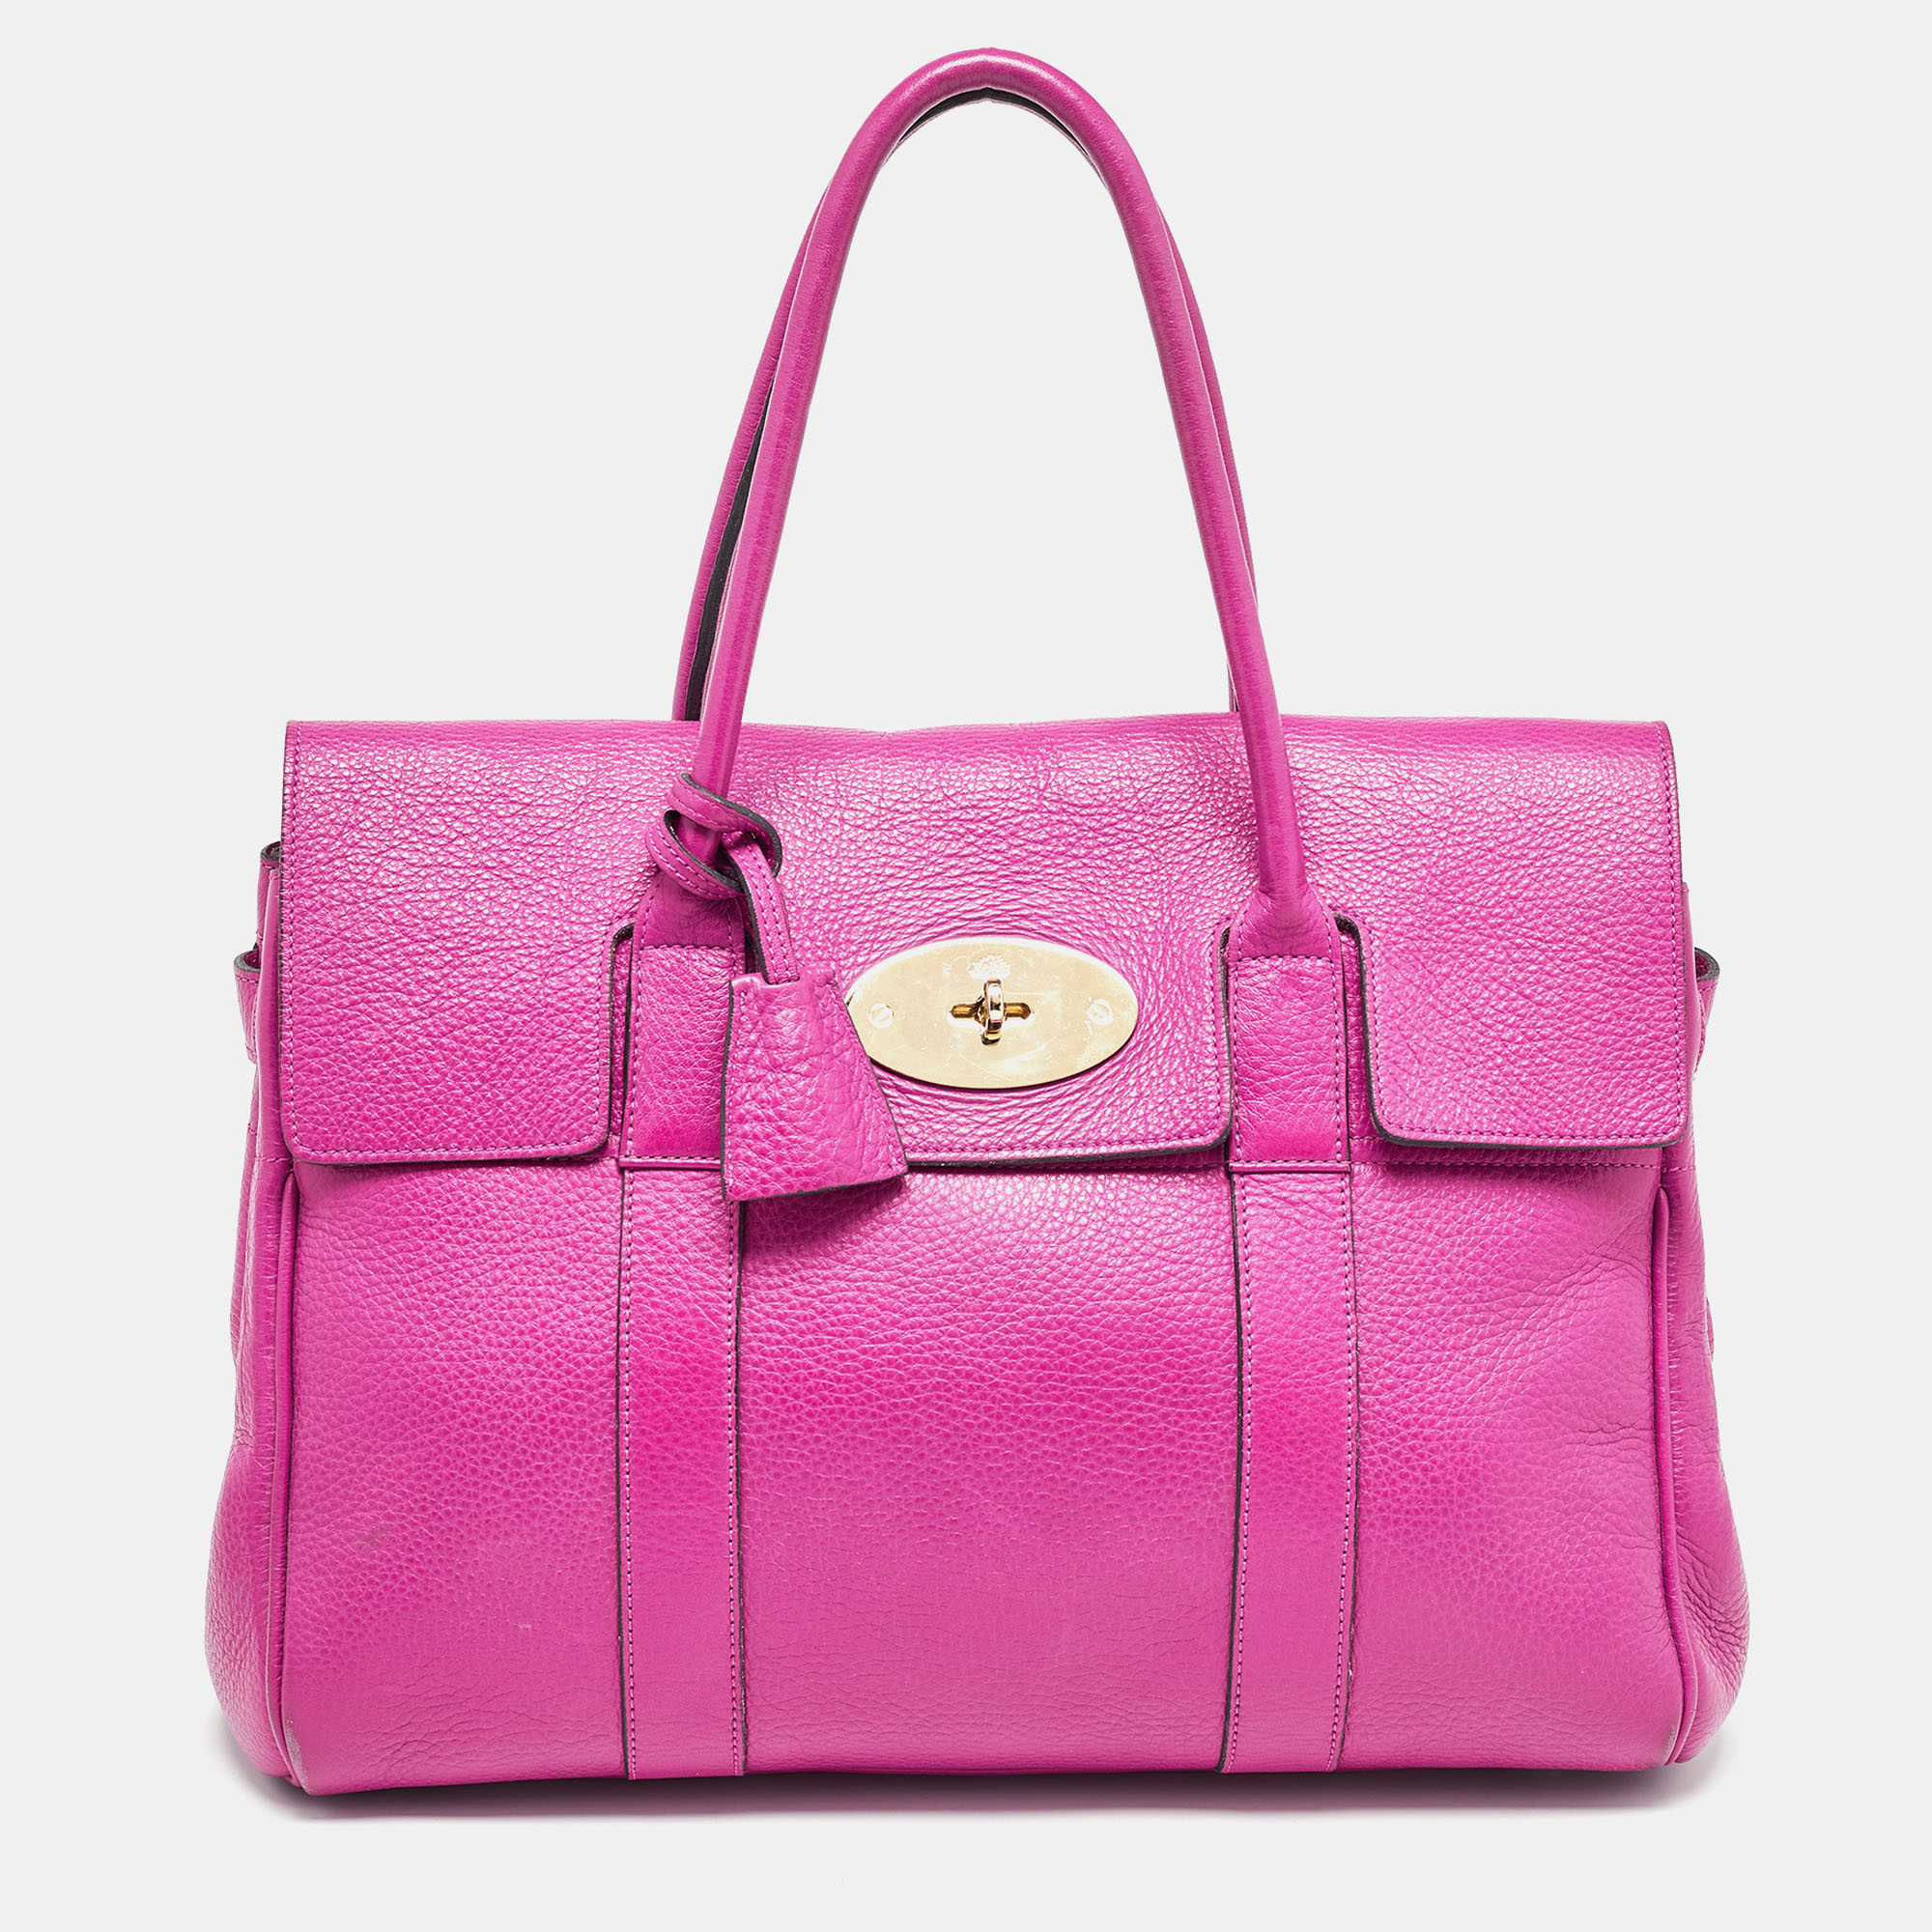 Mulberry fuchsia leather bayswater satchel